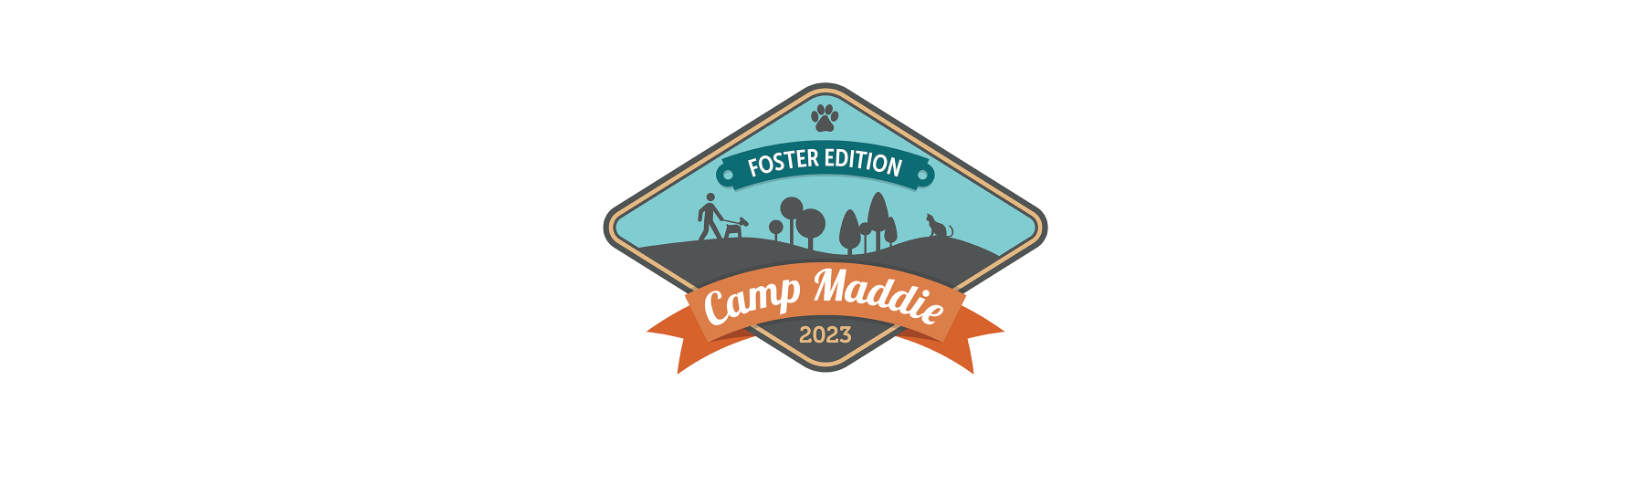 Camp Maddie: Foster Edition - Fosters Welcome: Low-Barrier Onboarding for High Community Engagement